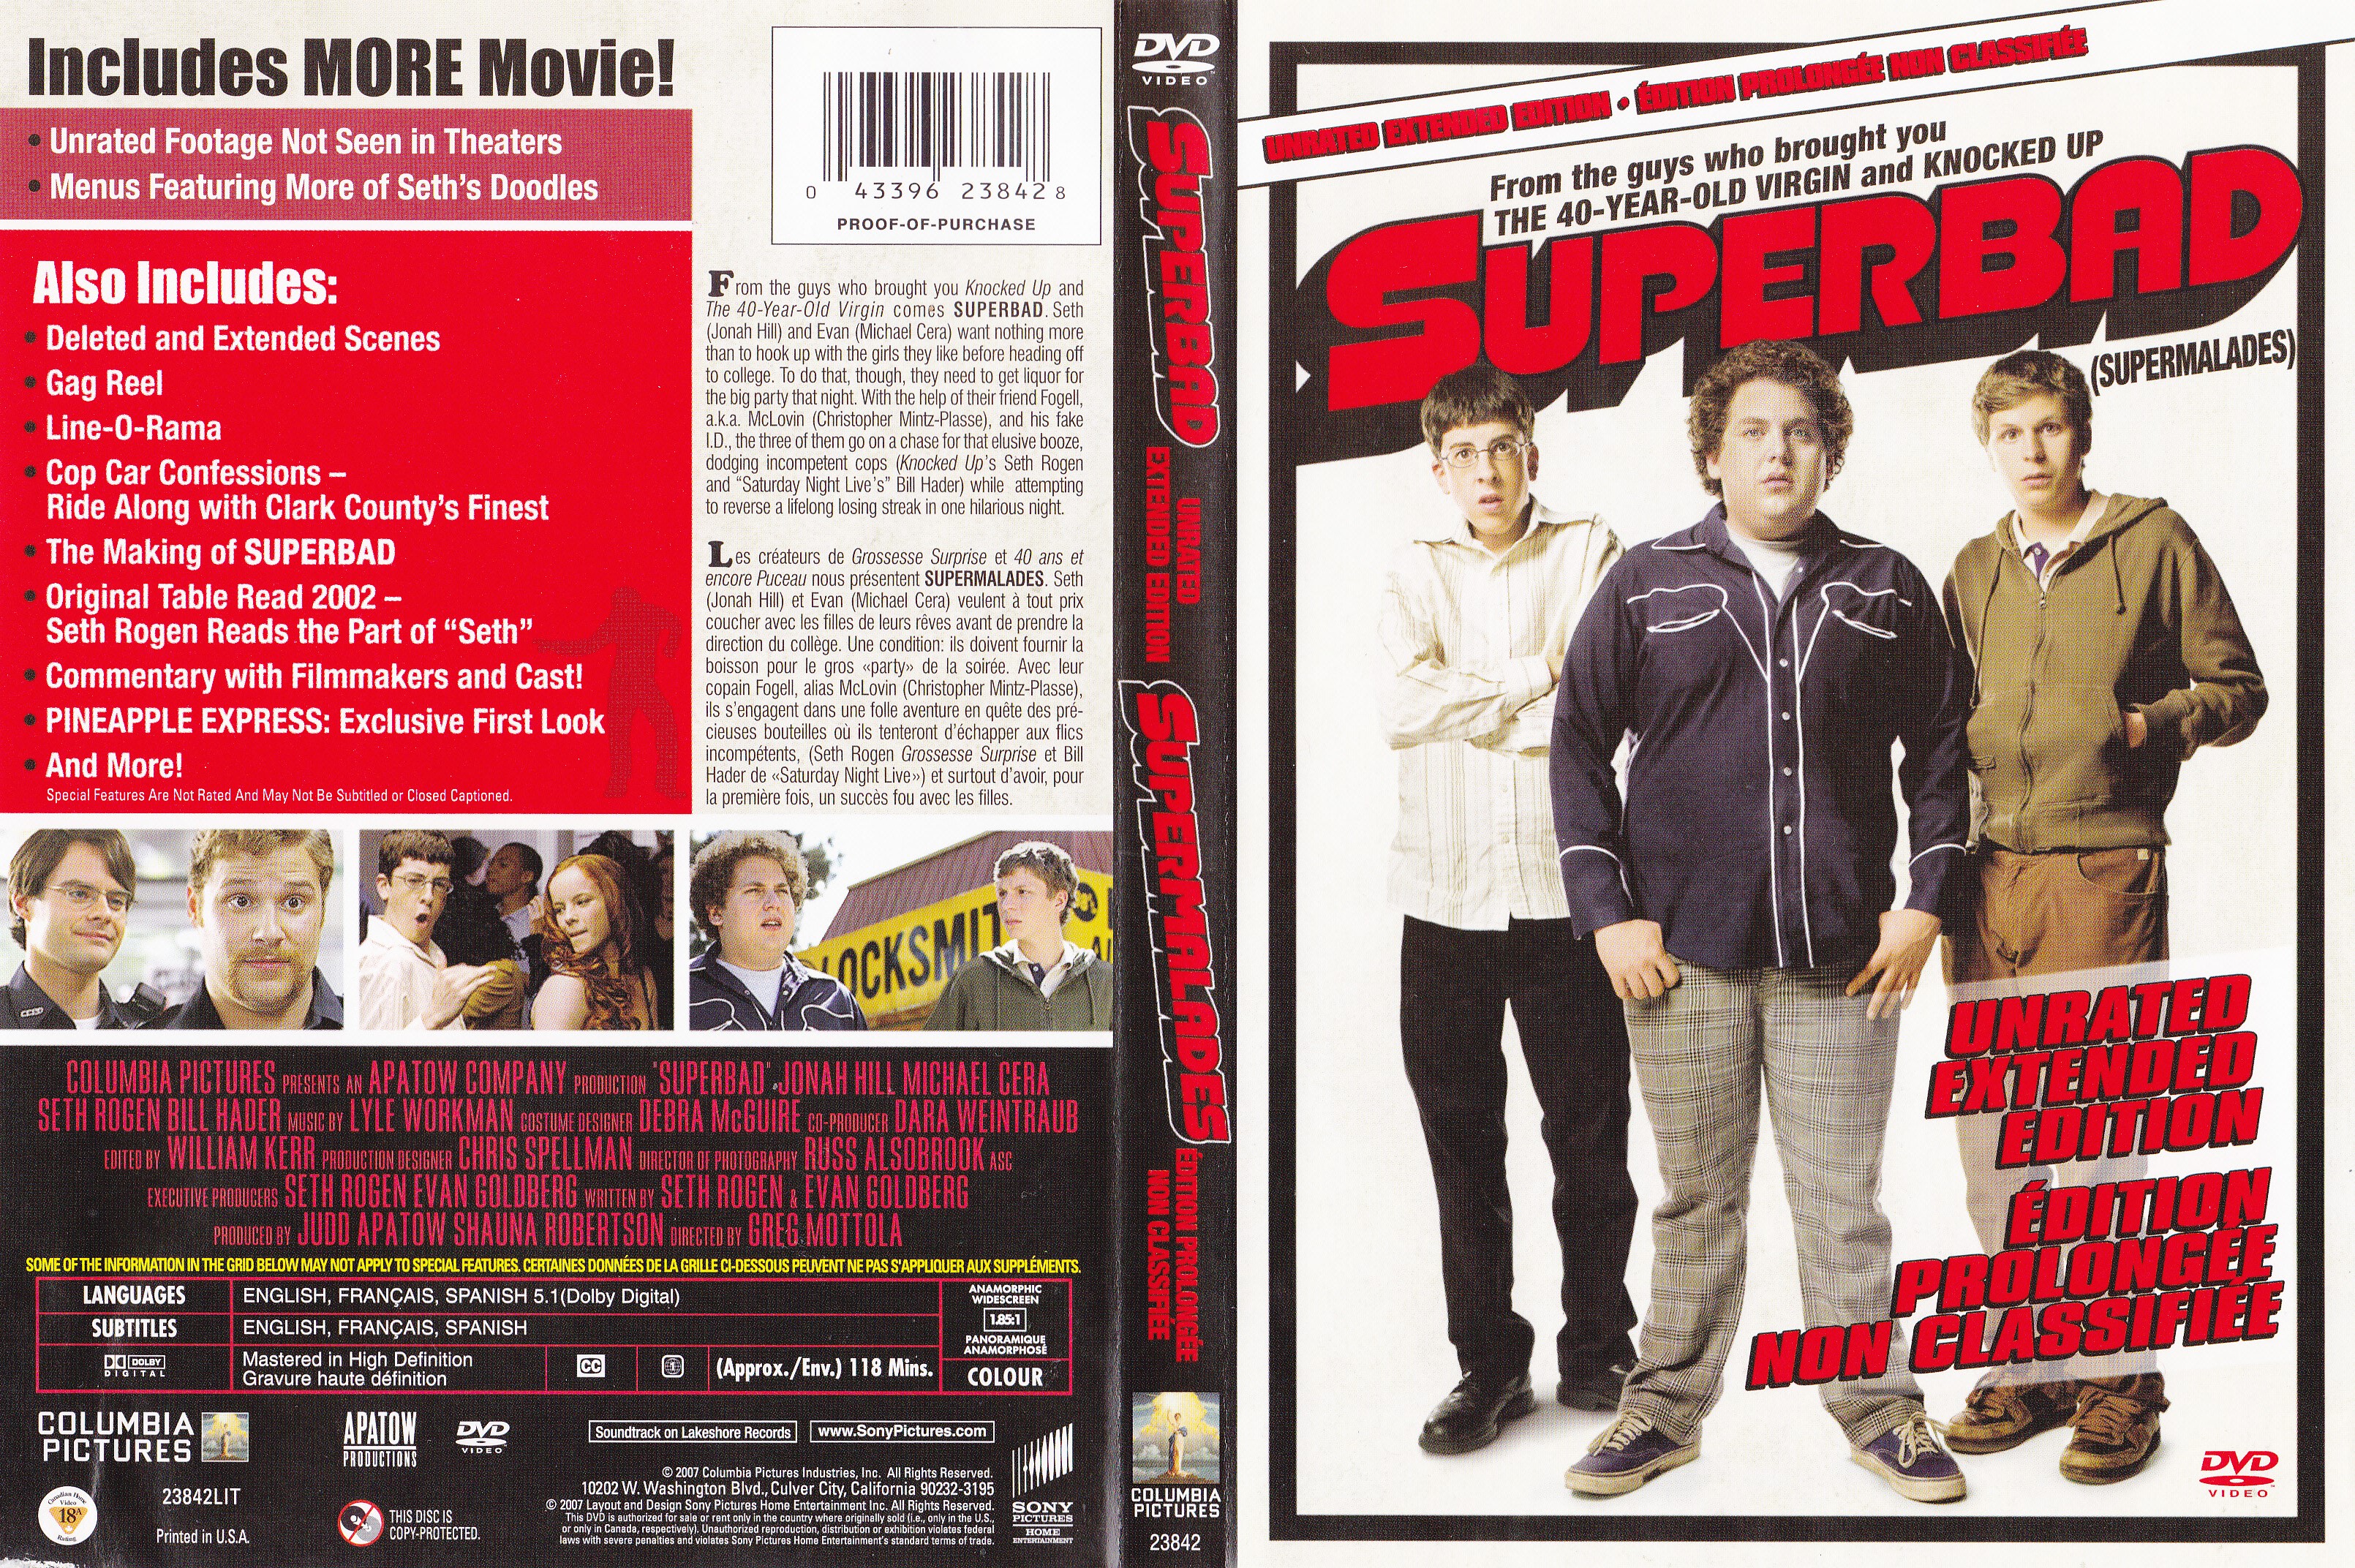 Jaquette DVD Superbad - Supermalades (Canadienne)